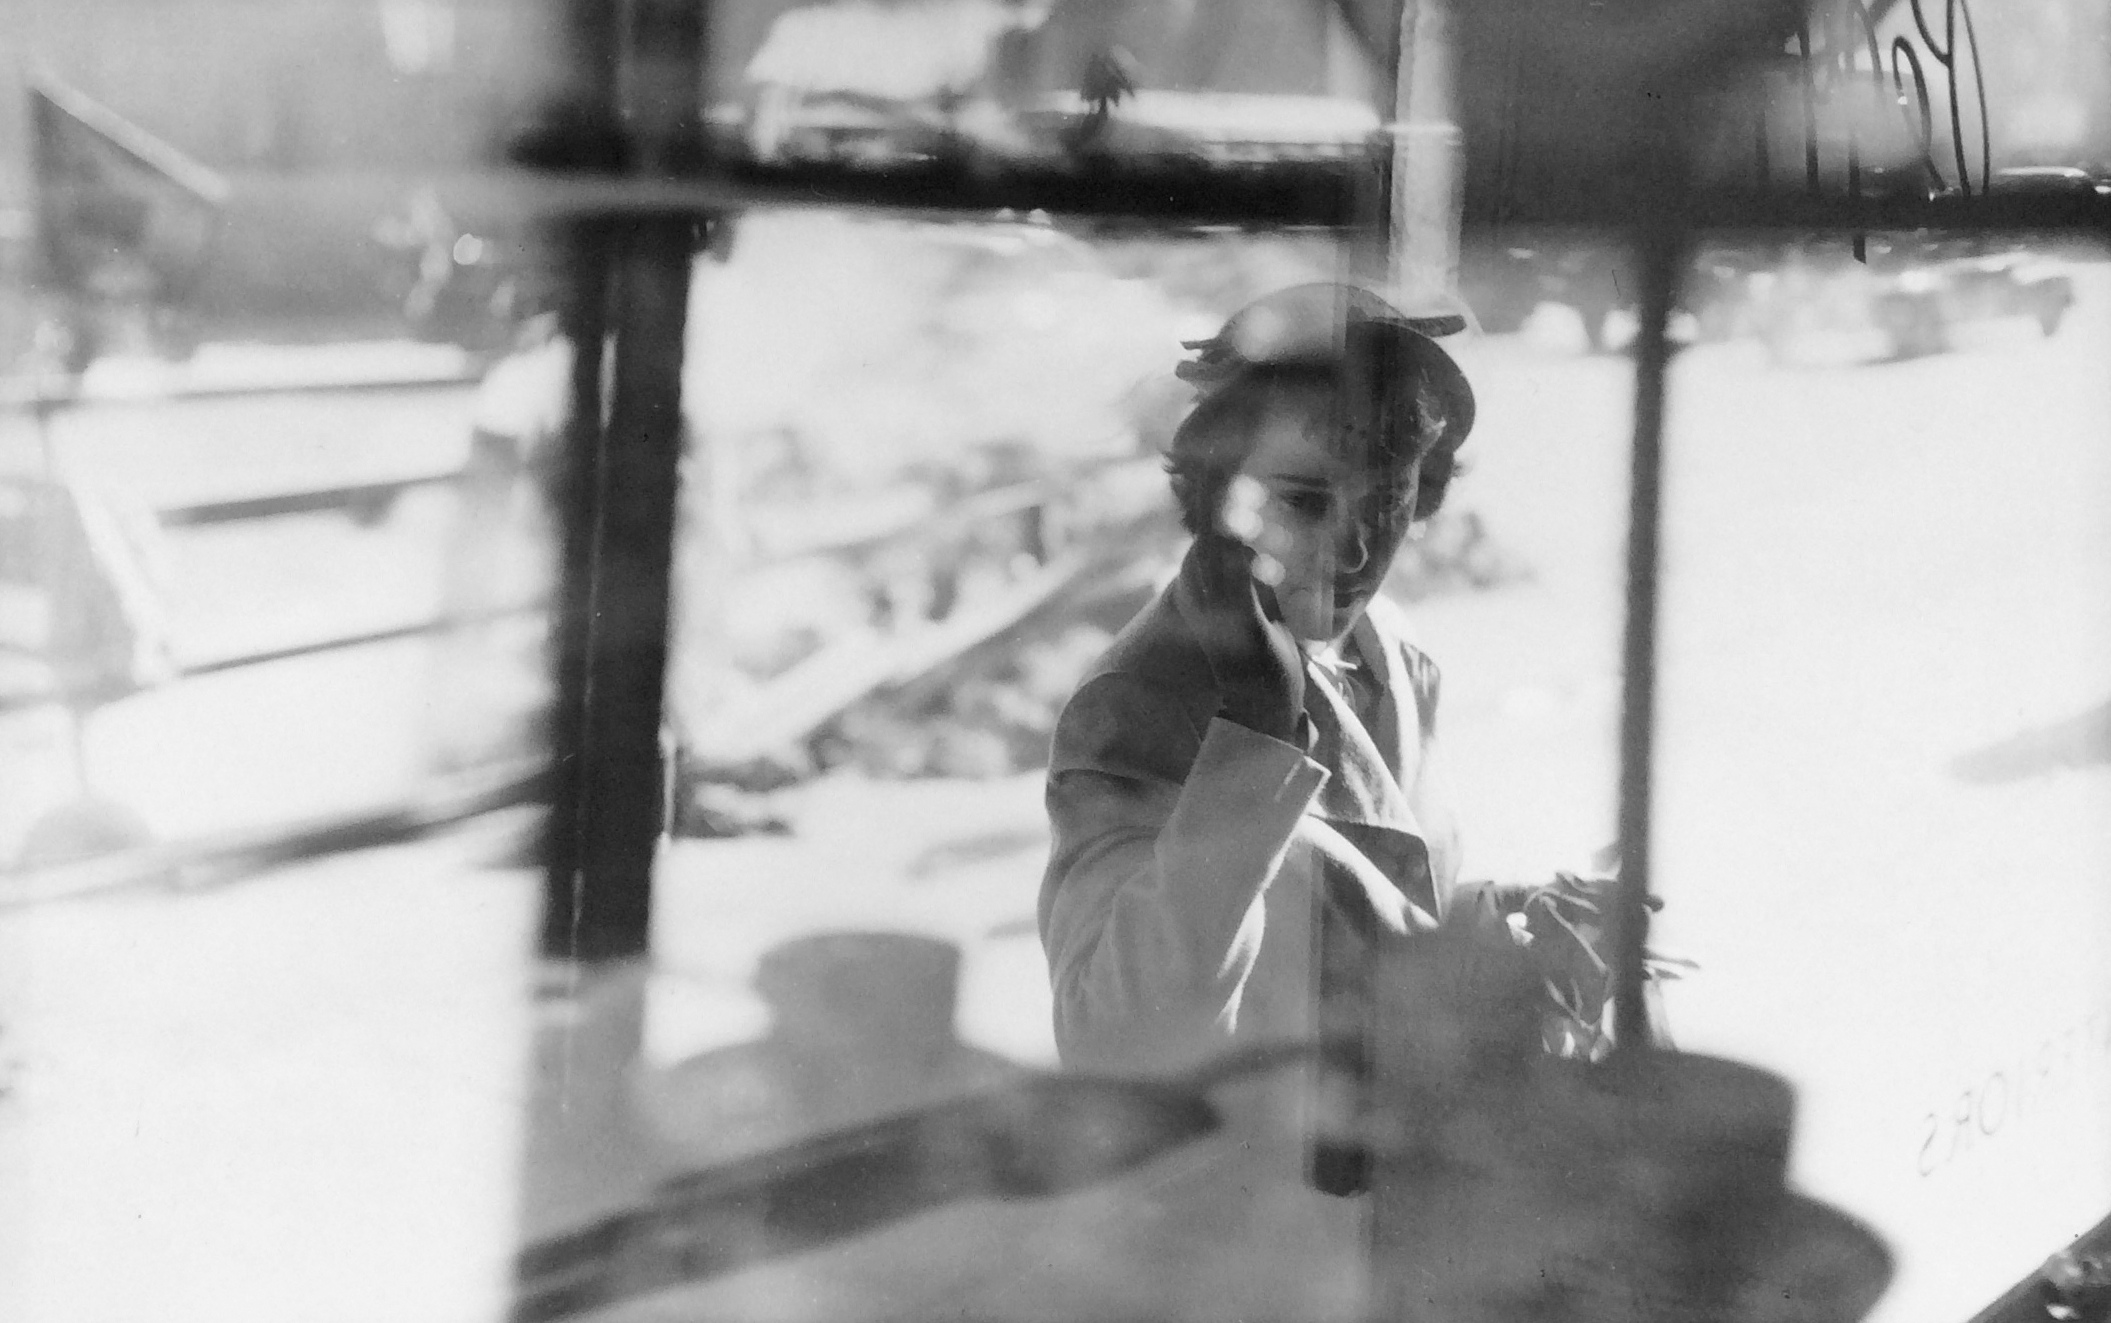 Saul Leiter, Exacta, 1948
Vintage gelatin silver print 
27, 7 x 35,5 cm
Signed and dated by photographer verso